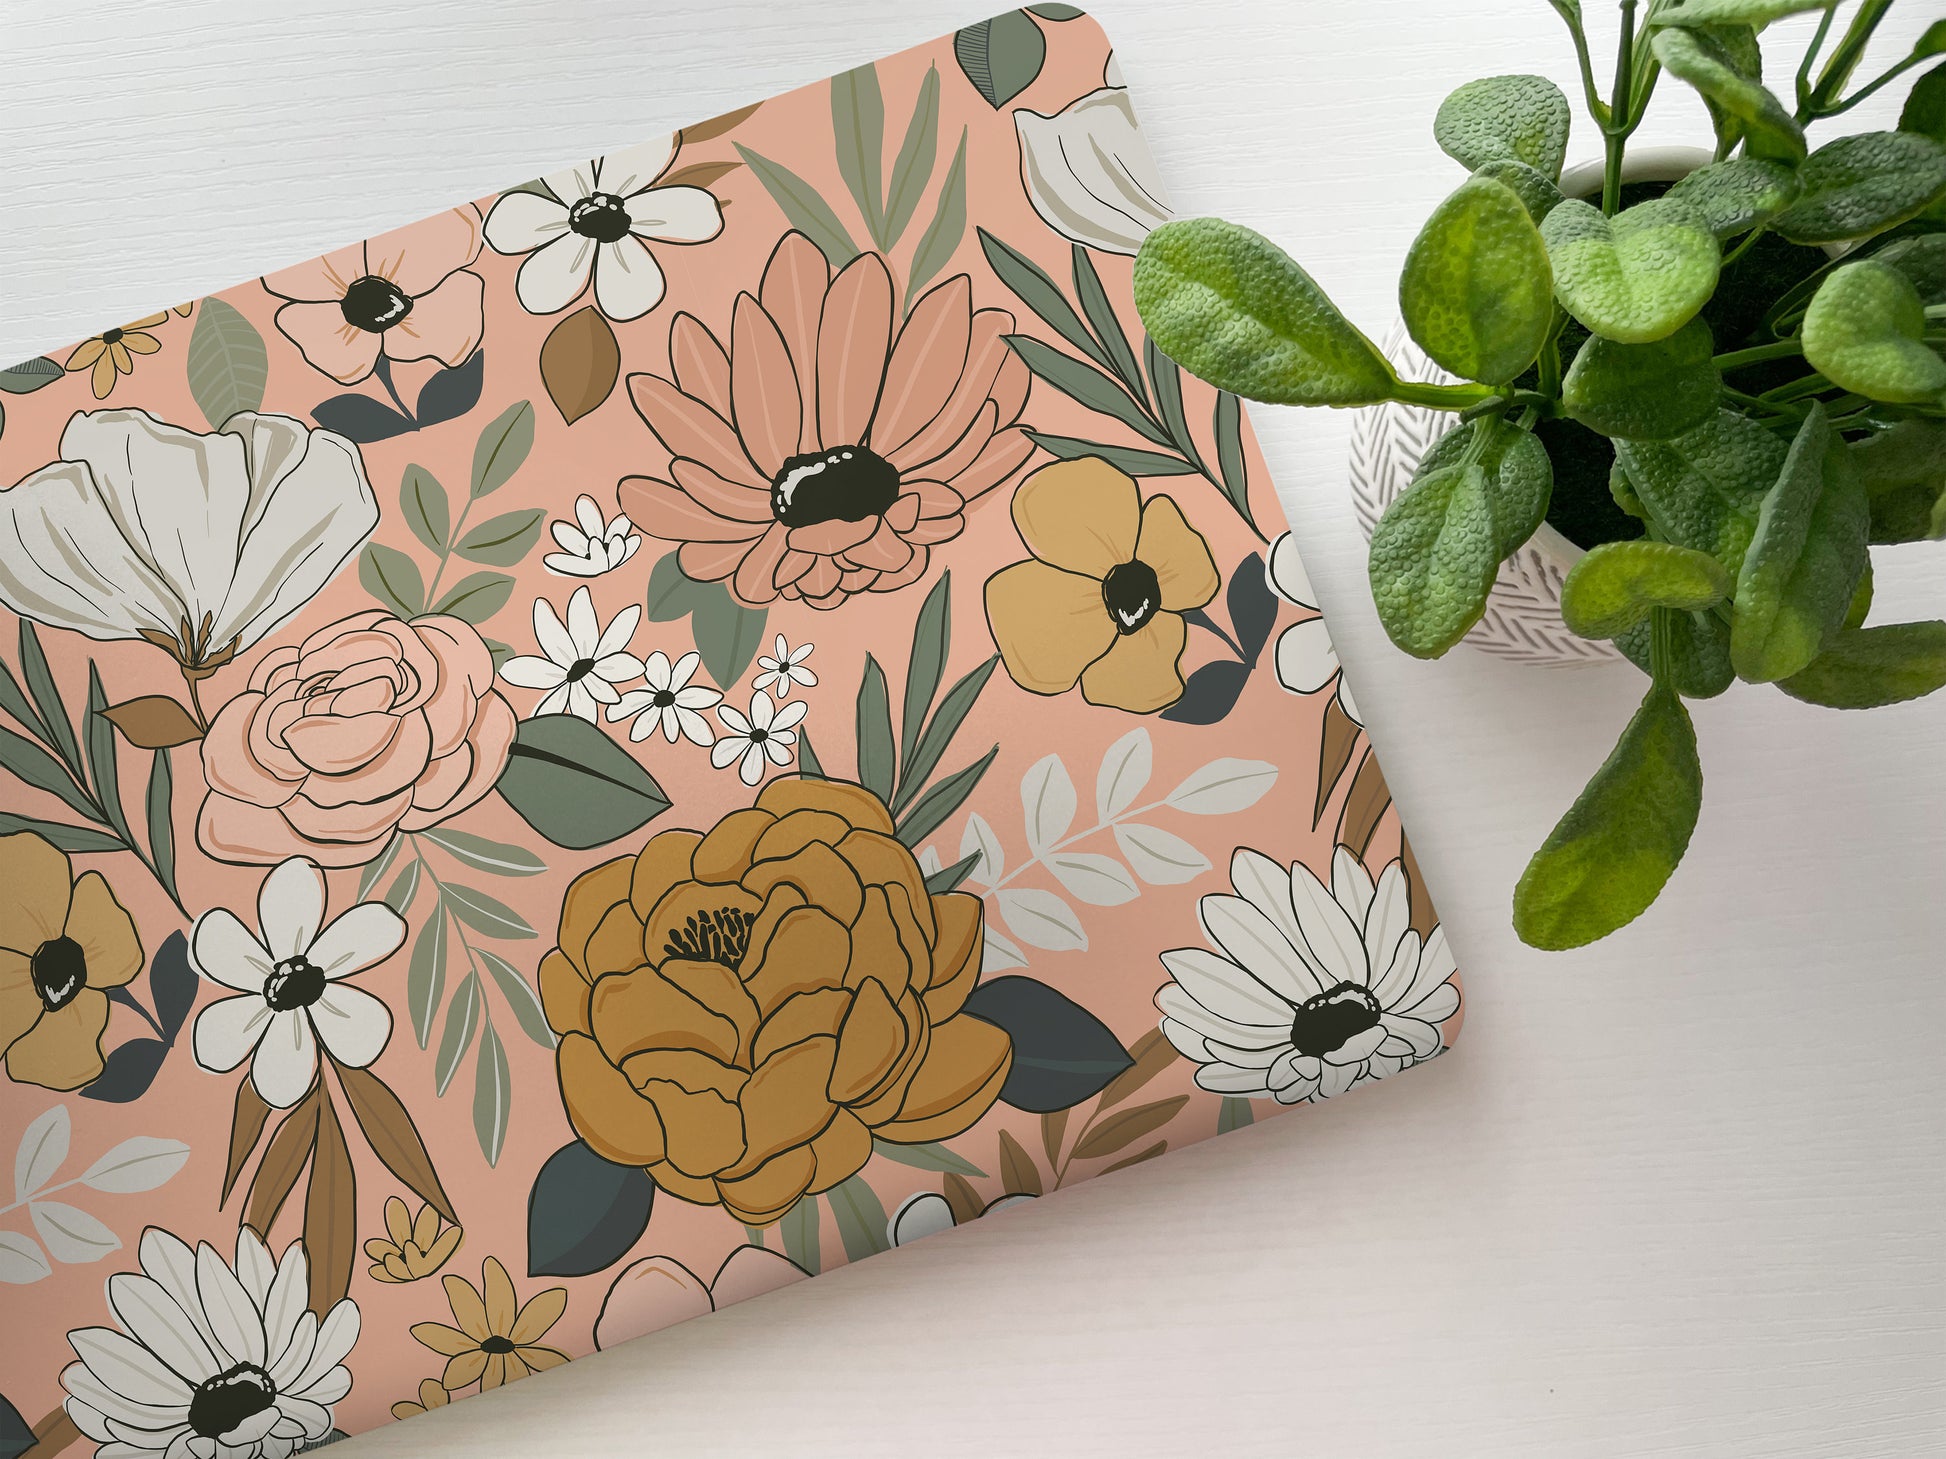 Pink Floral Laptop Skin, Laptop Cover, Laptop Skins, Removable Laptop Skins, Laptop Decal, Customized Laptop Full Coverage Stickers, 12 - James & Inks